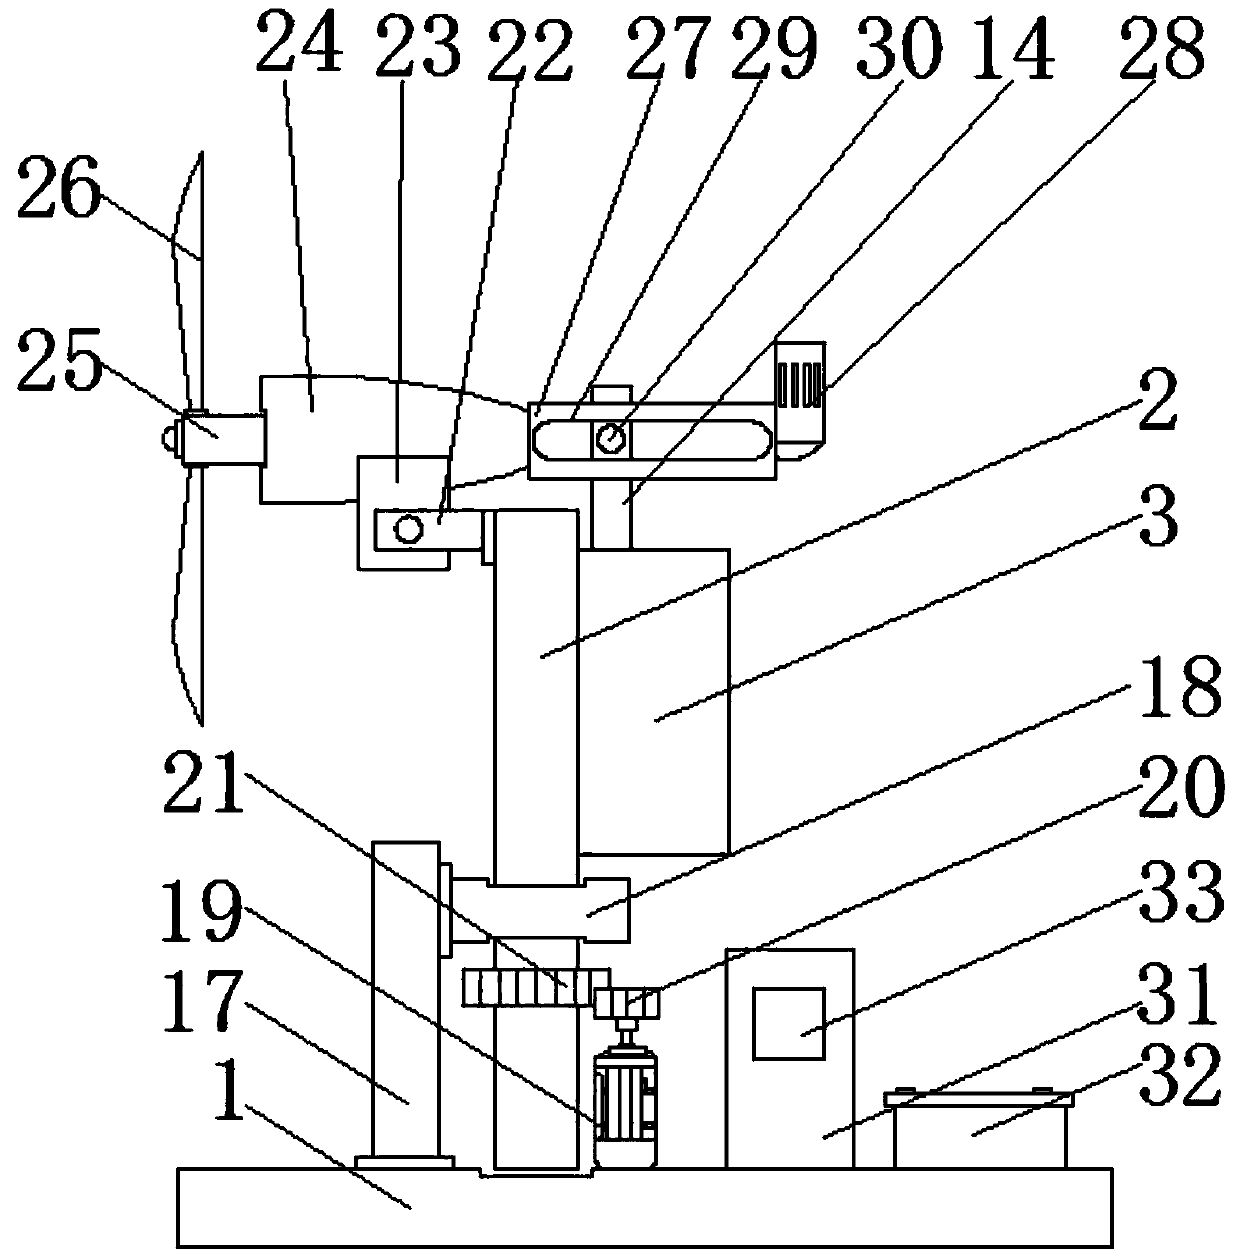 Wind generating set capable of adjusting direction automatically